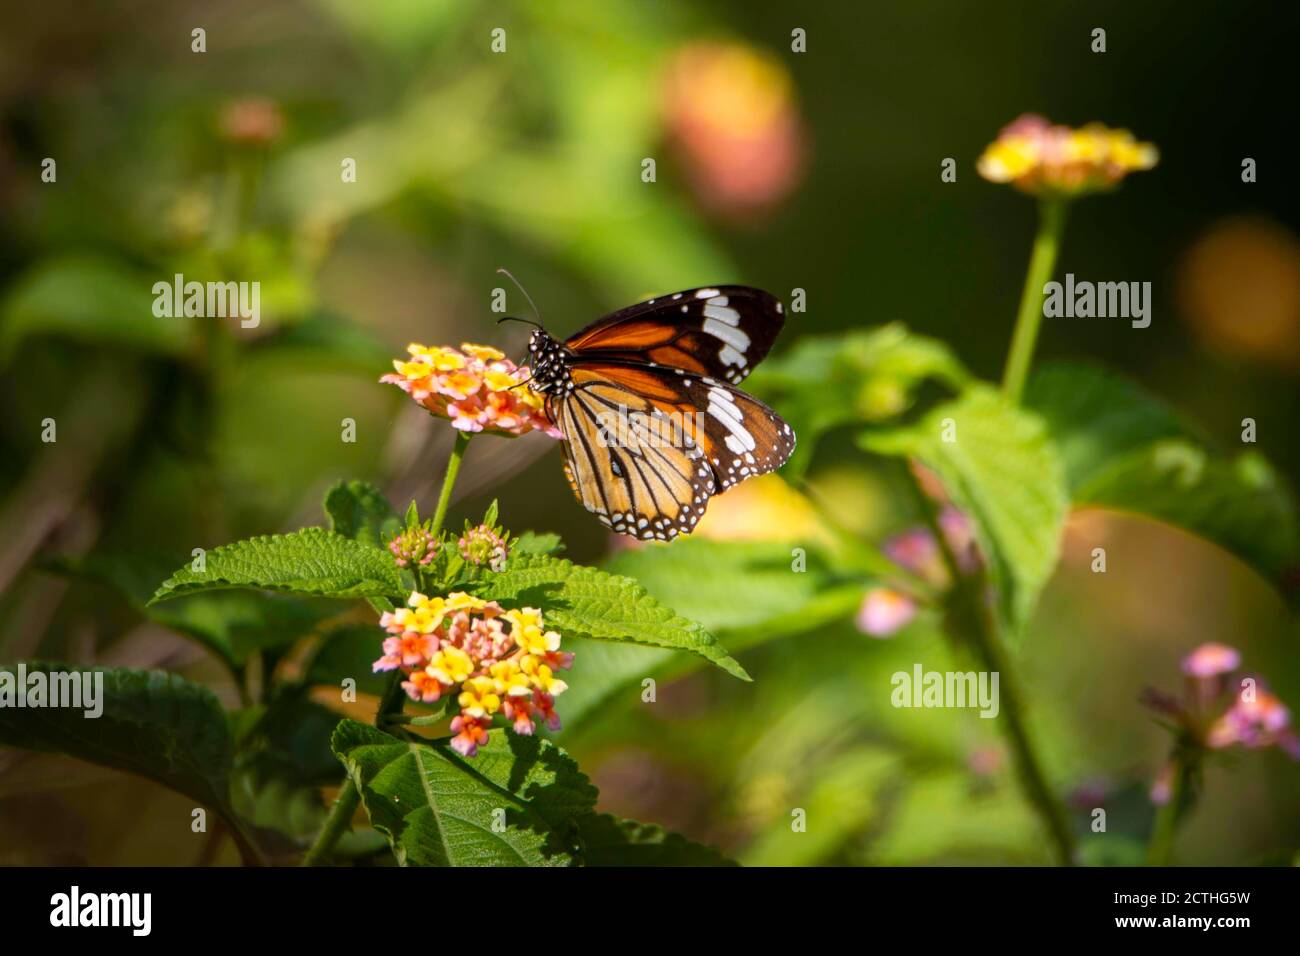 Lovely Colorful Butterfly on flower Stock Photo